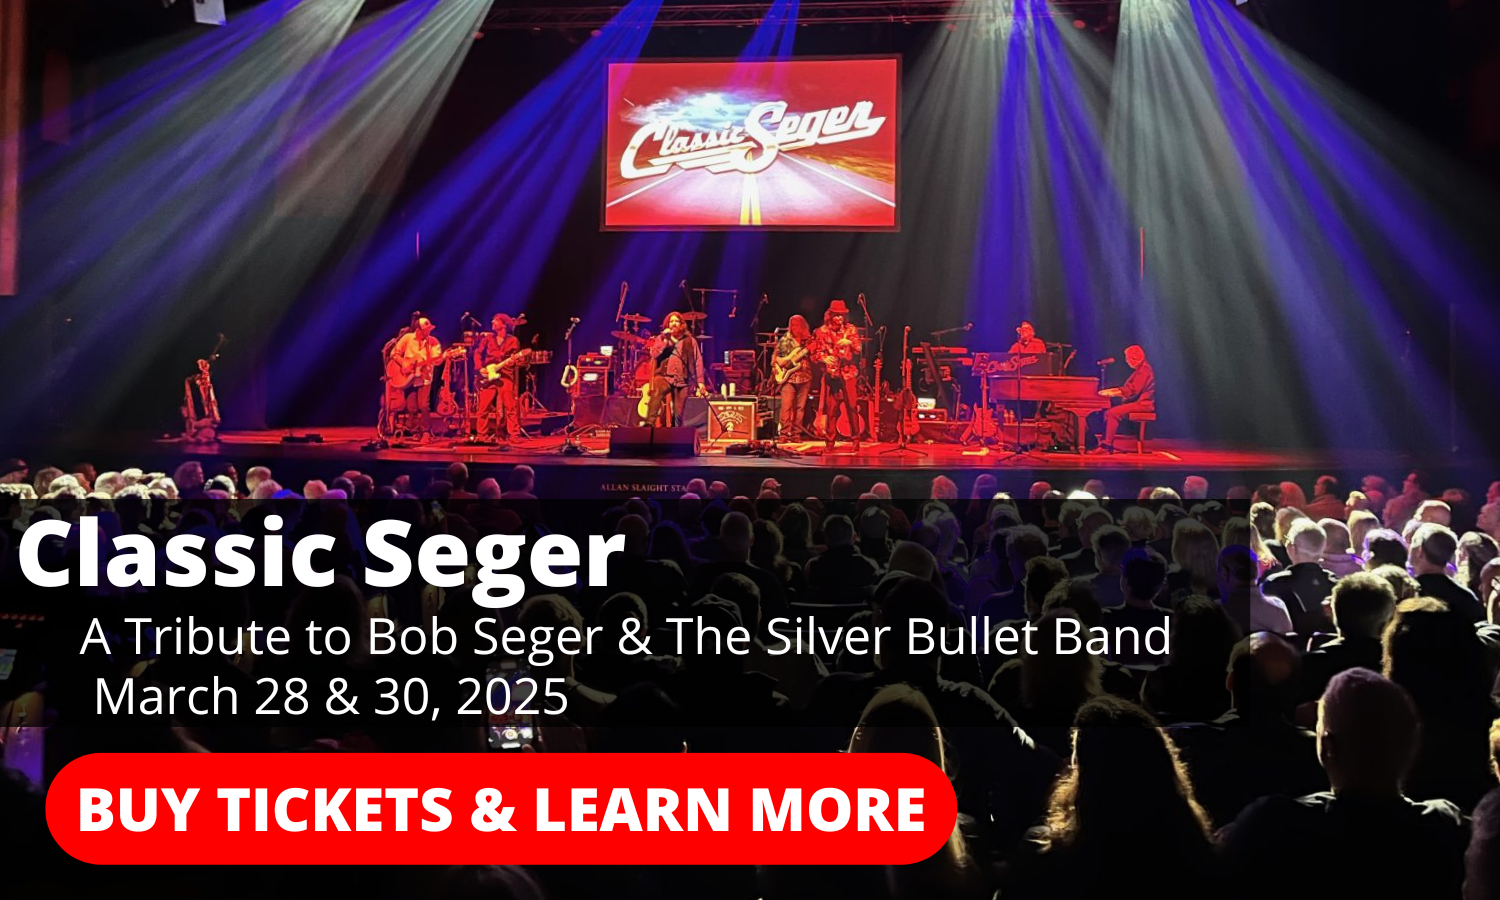 Classic Seger: Tribute to Bob Seger and The Silver Bullet Band